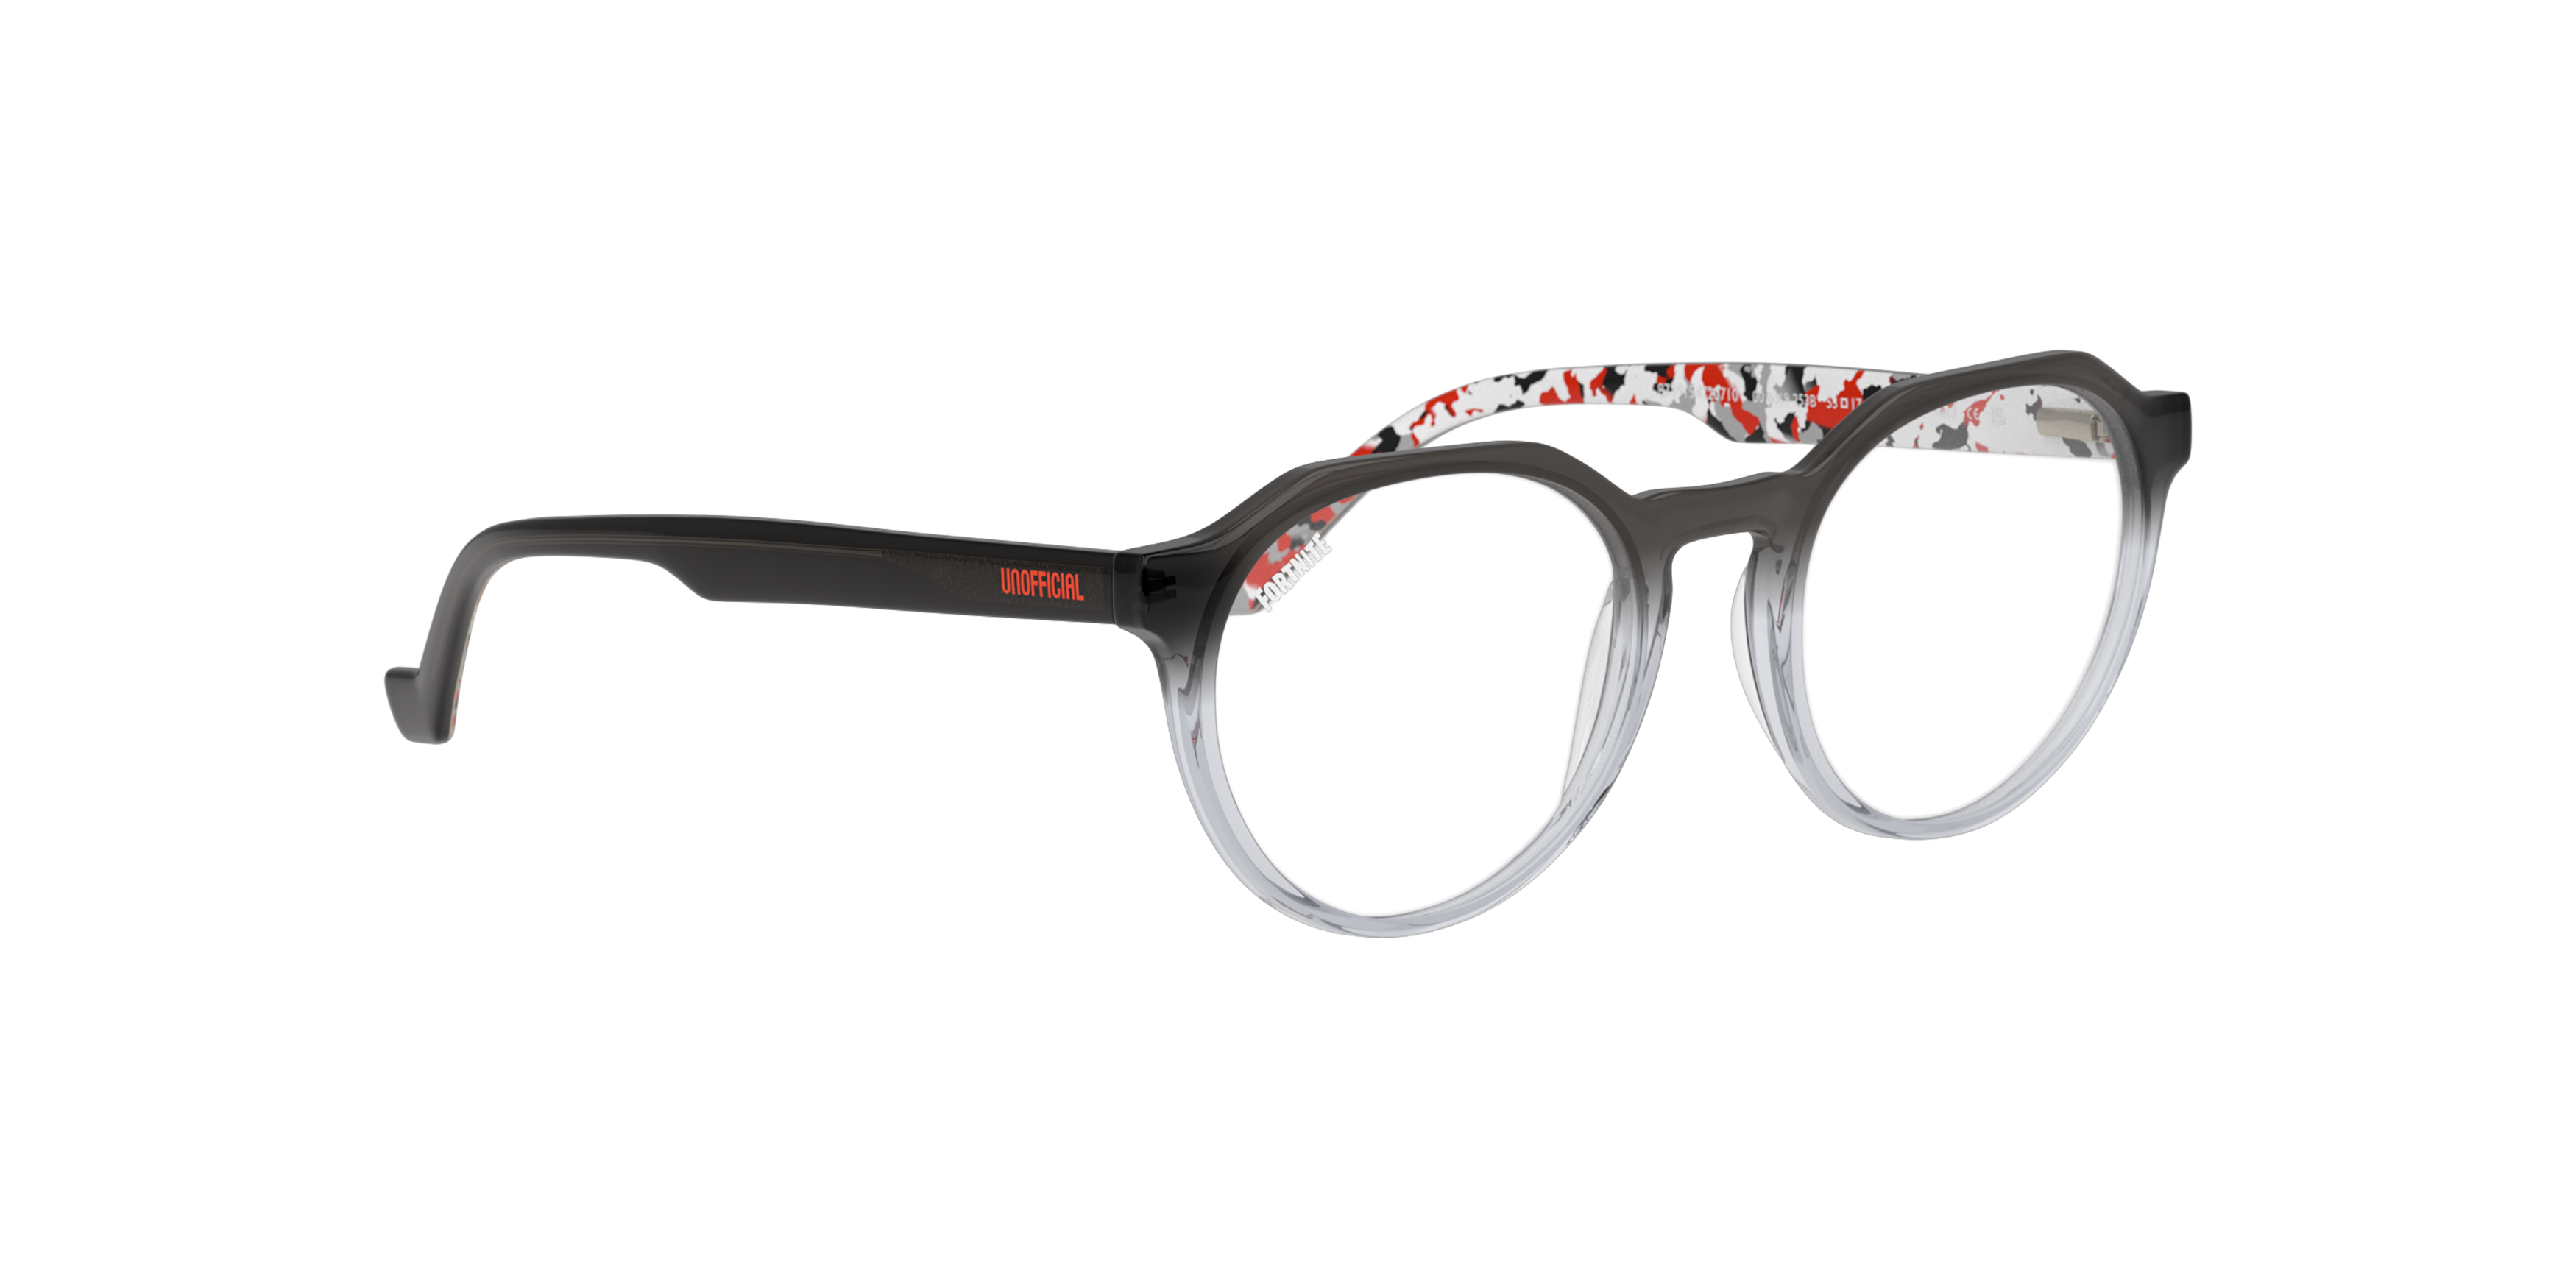 Angle_Right01 Fortnite with Unofficial UNSU0162 Glasses Transparent / Grey